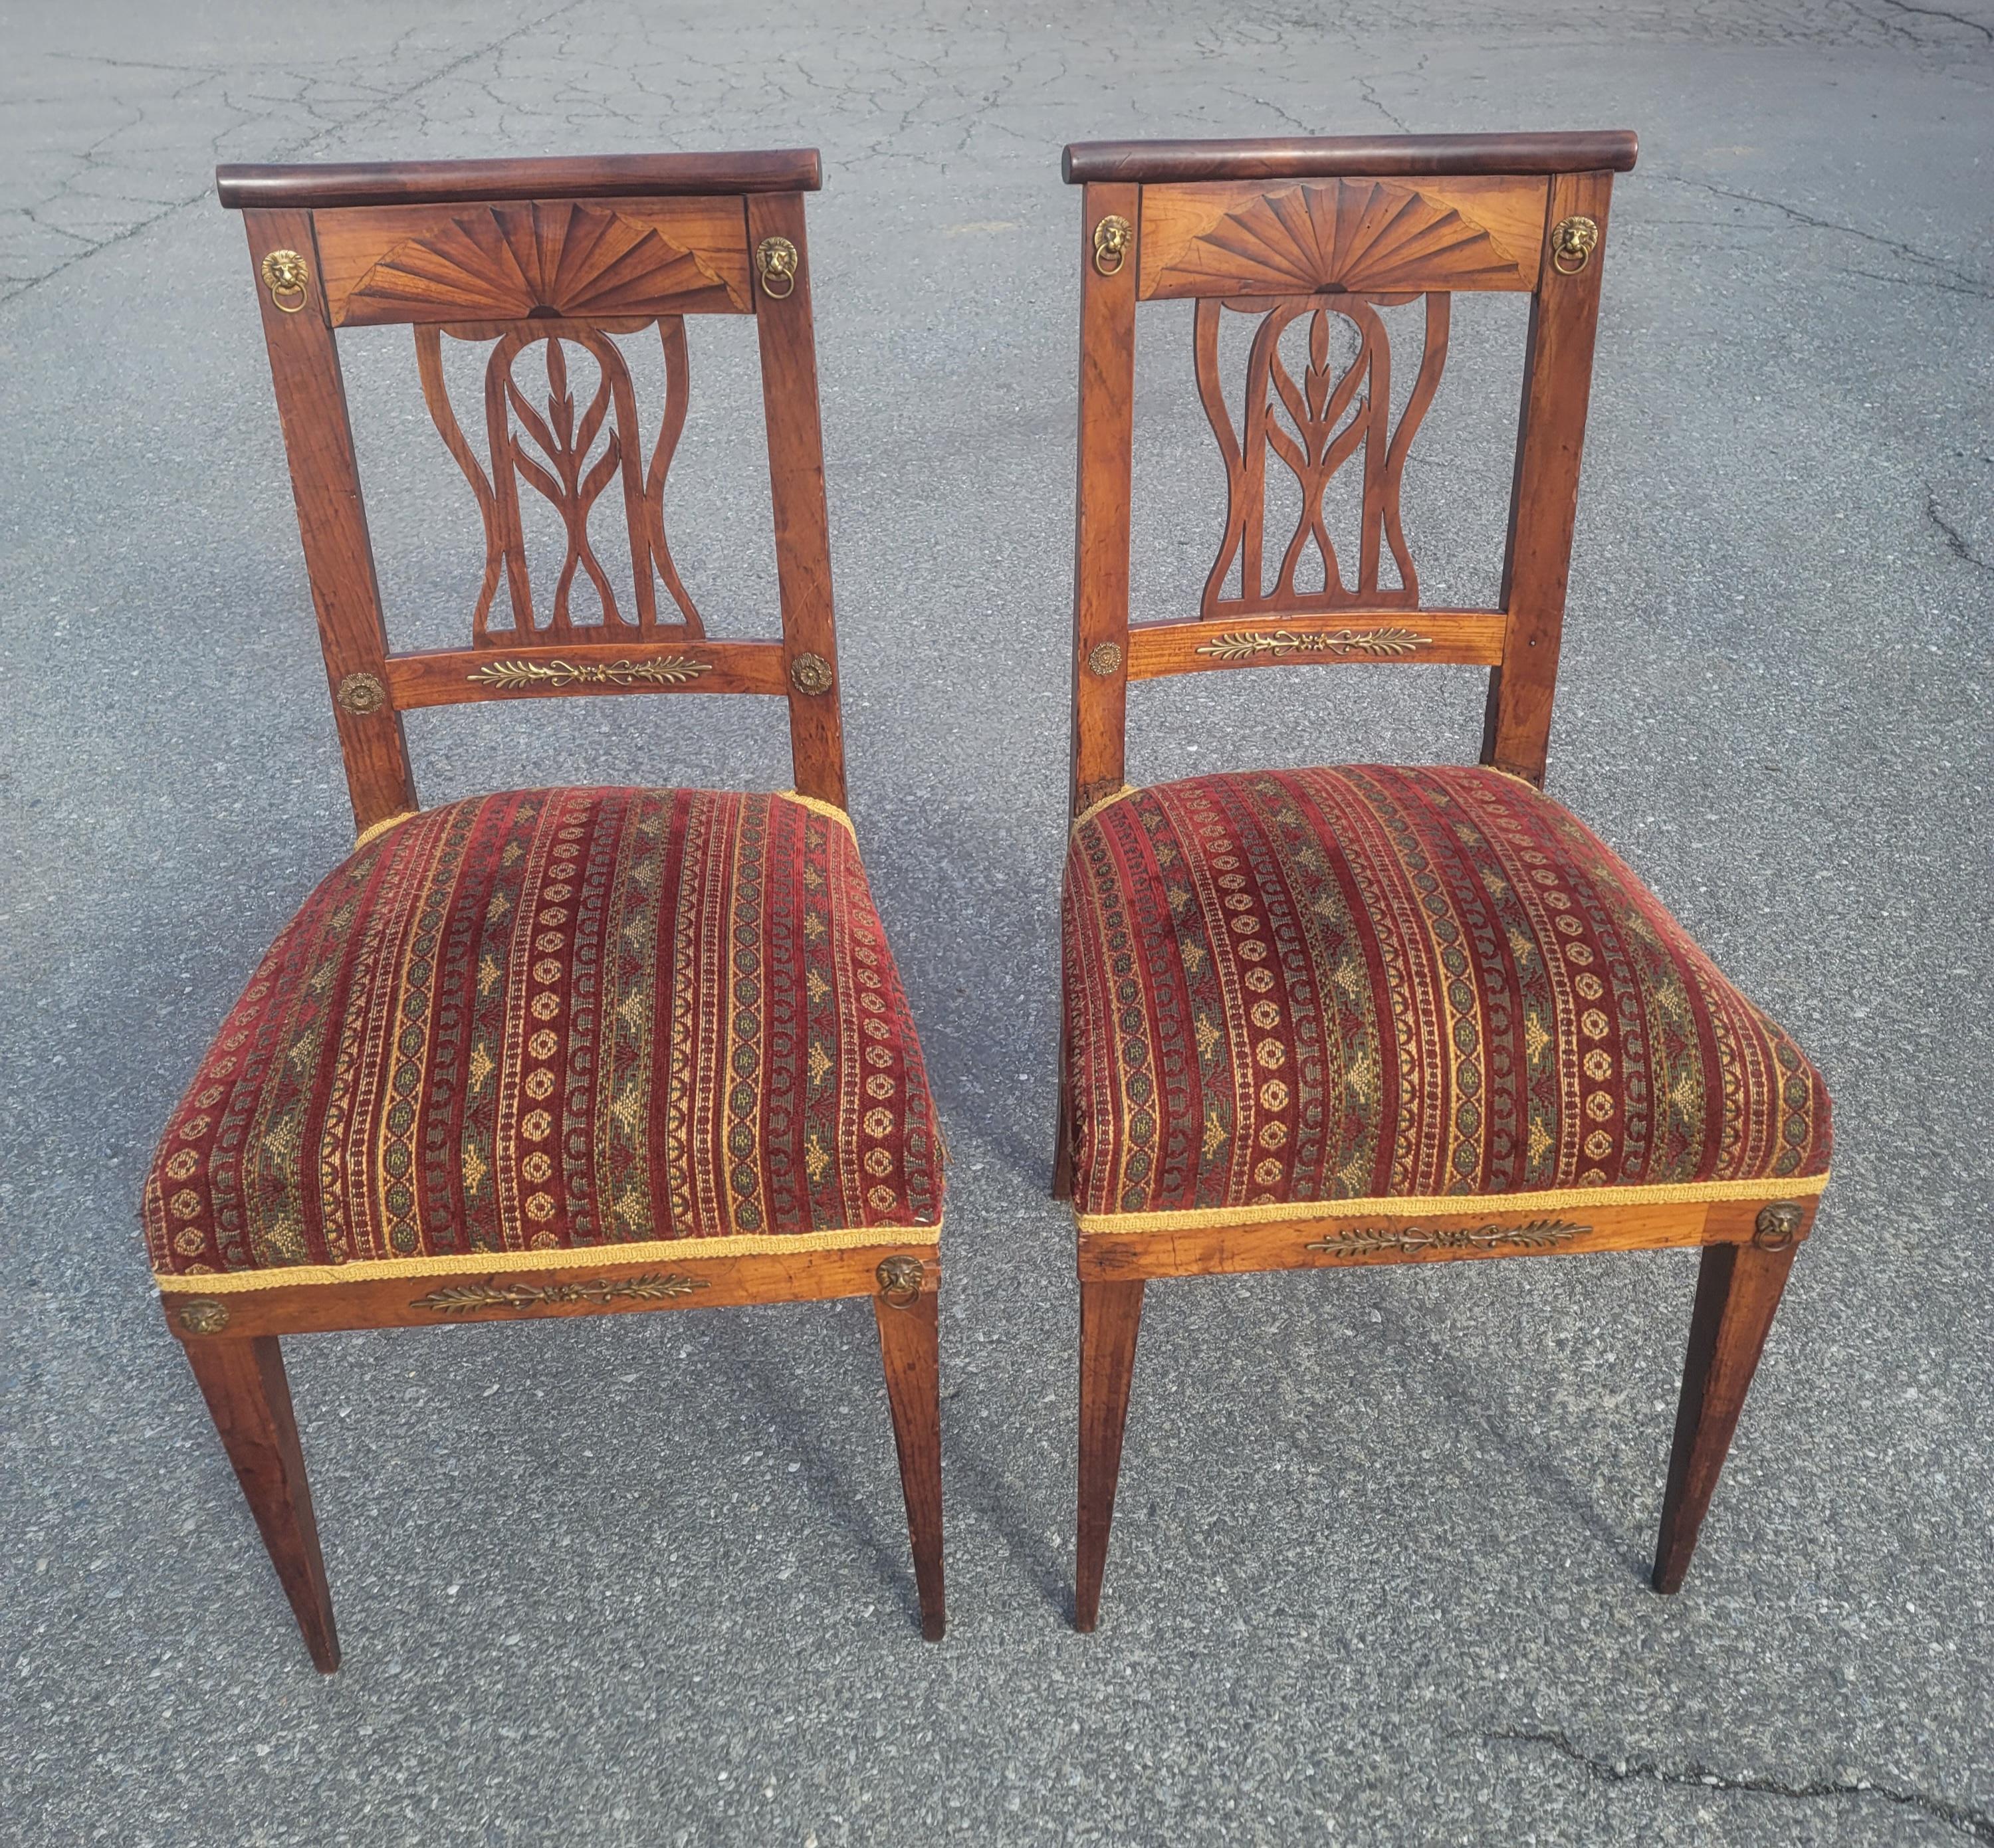 19th C. Swedish Continental Brass Mounted & Parquetry Inlaid Cherry Chairs, Pair For Sale 3